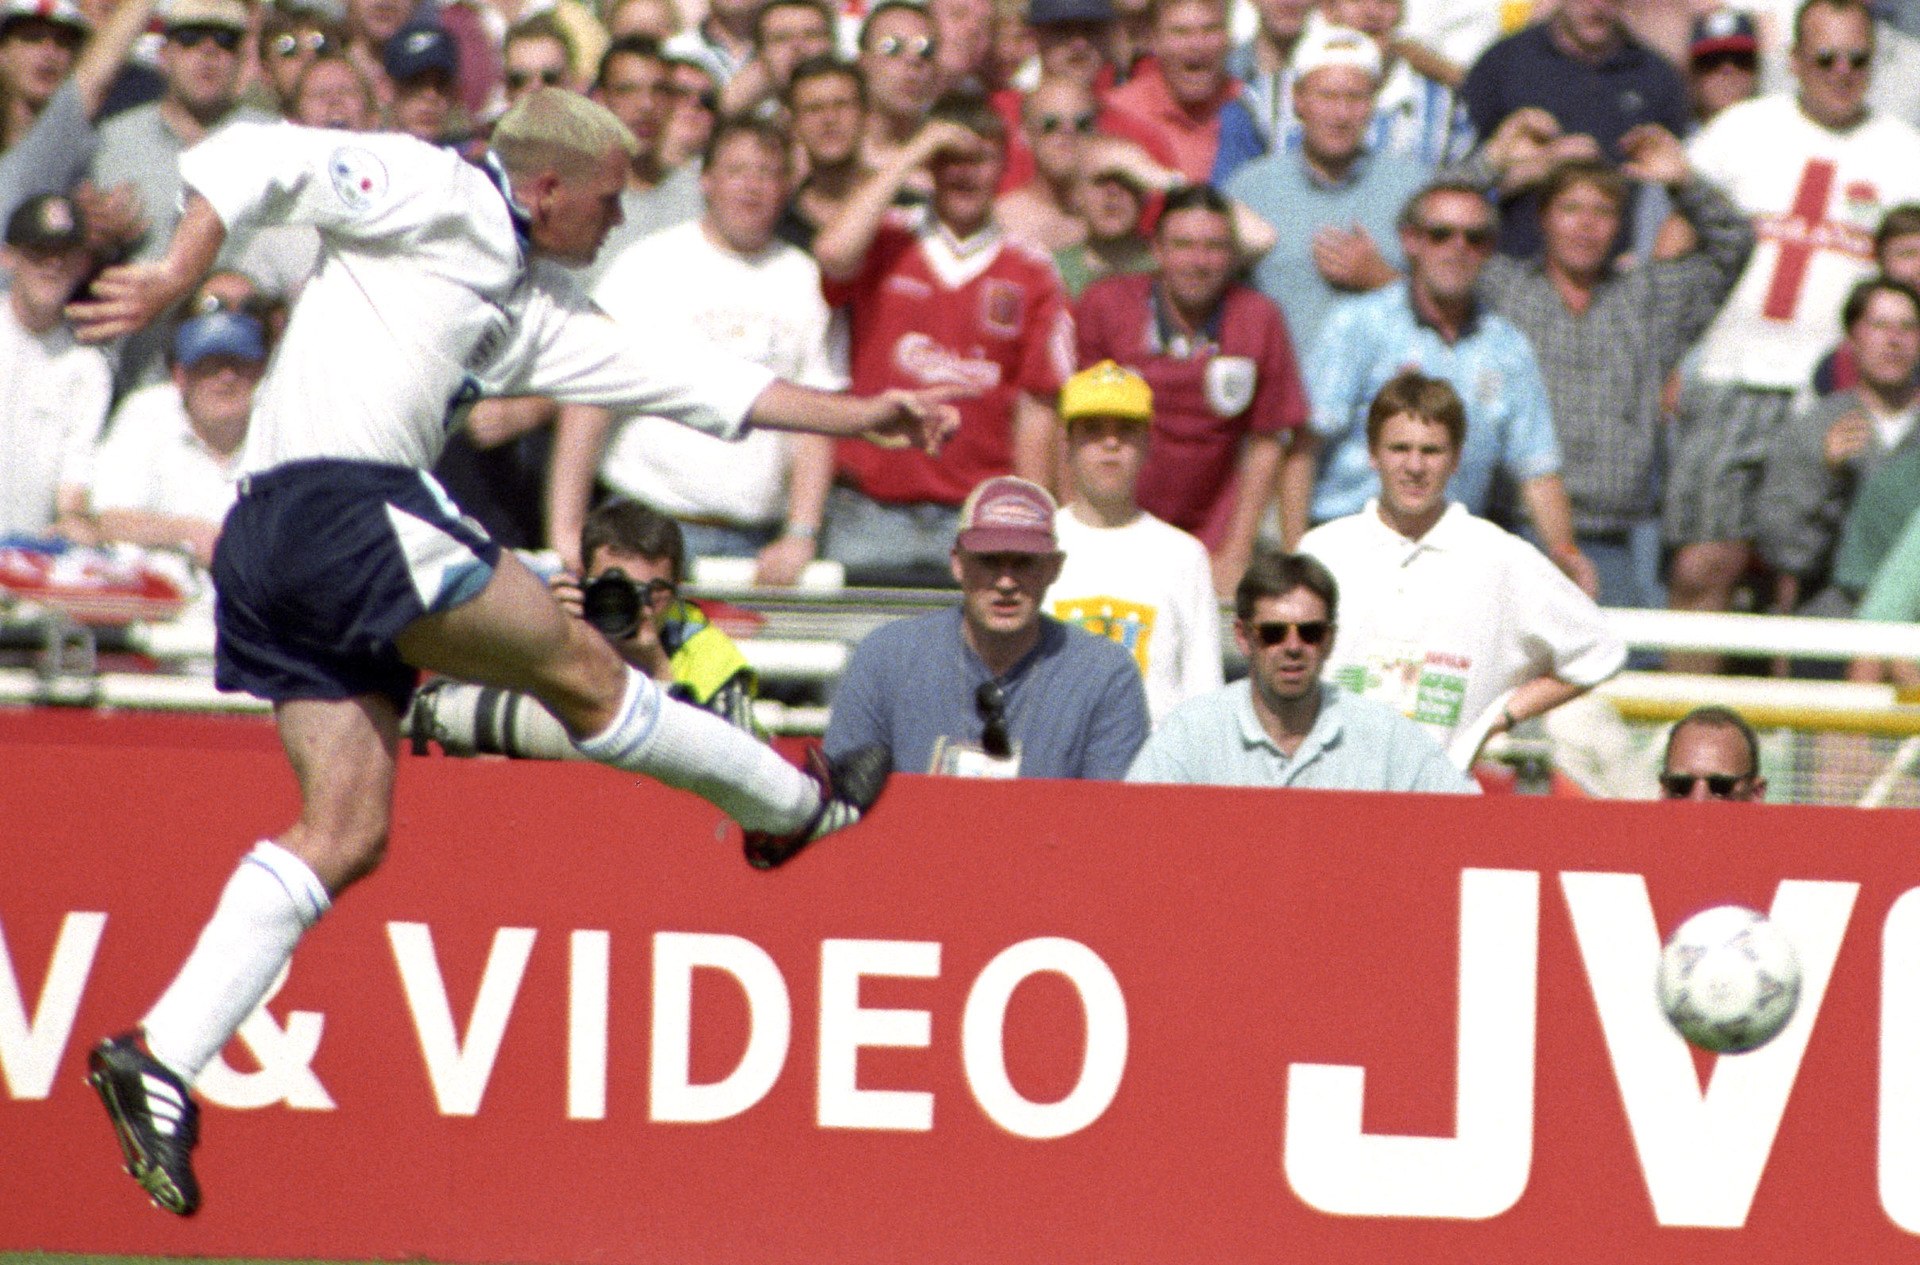 Magic from Paul Gascoigne put England 2-0 up against Scotland. (Photo by SNS Group)